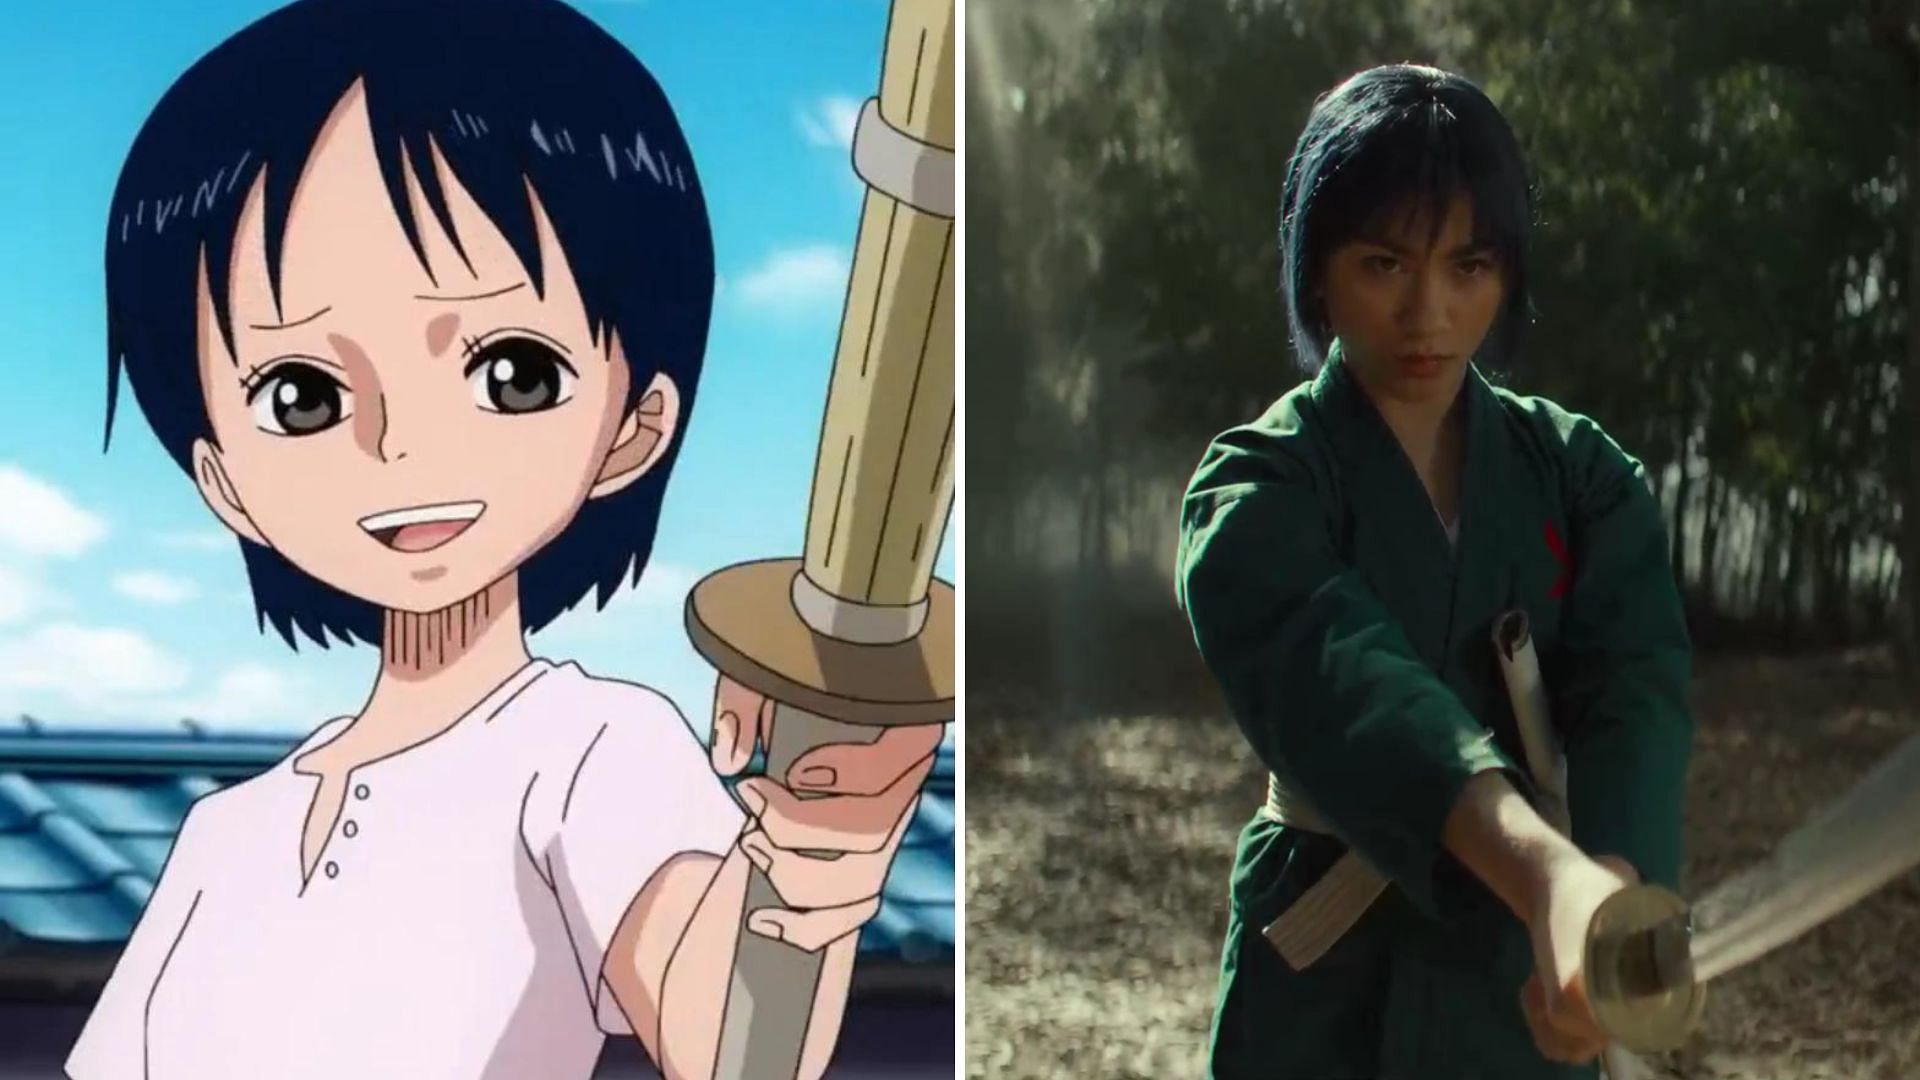 Shimotsuki Kuina as shown in the anime and the live action (Image via Toei Animation and Netflix)